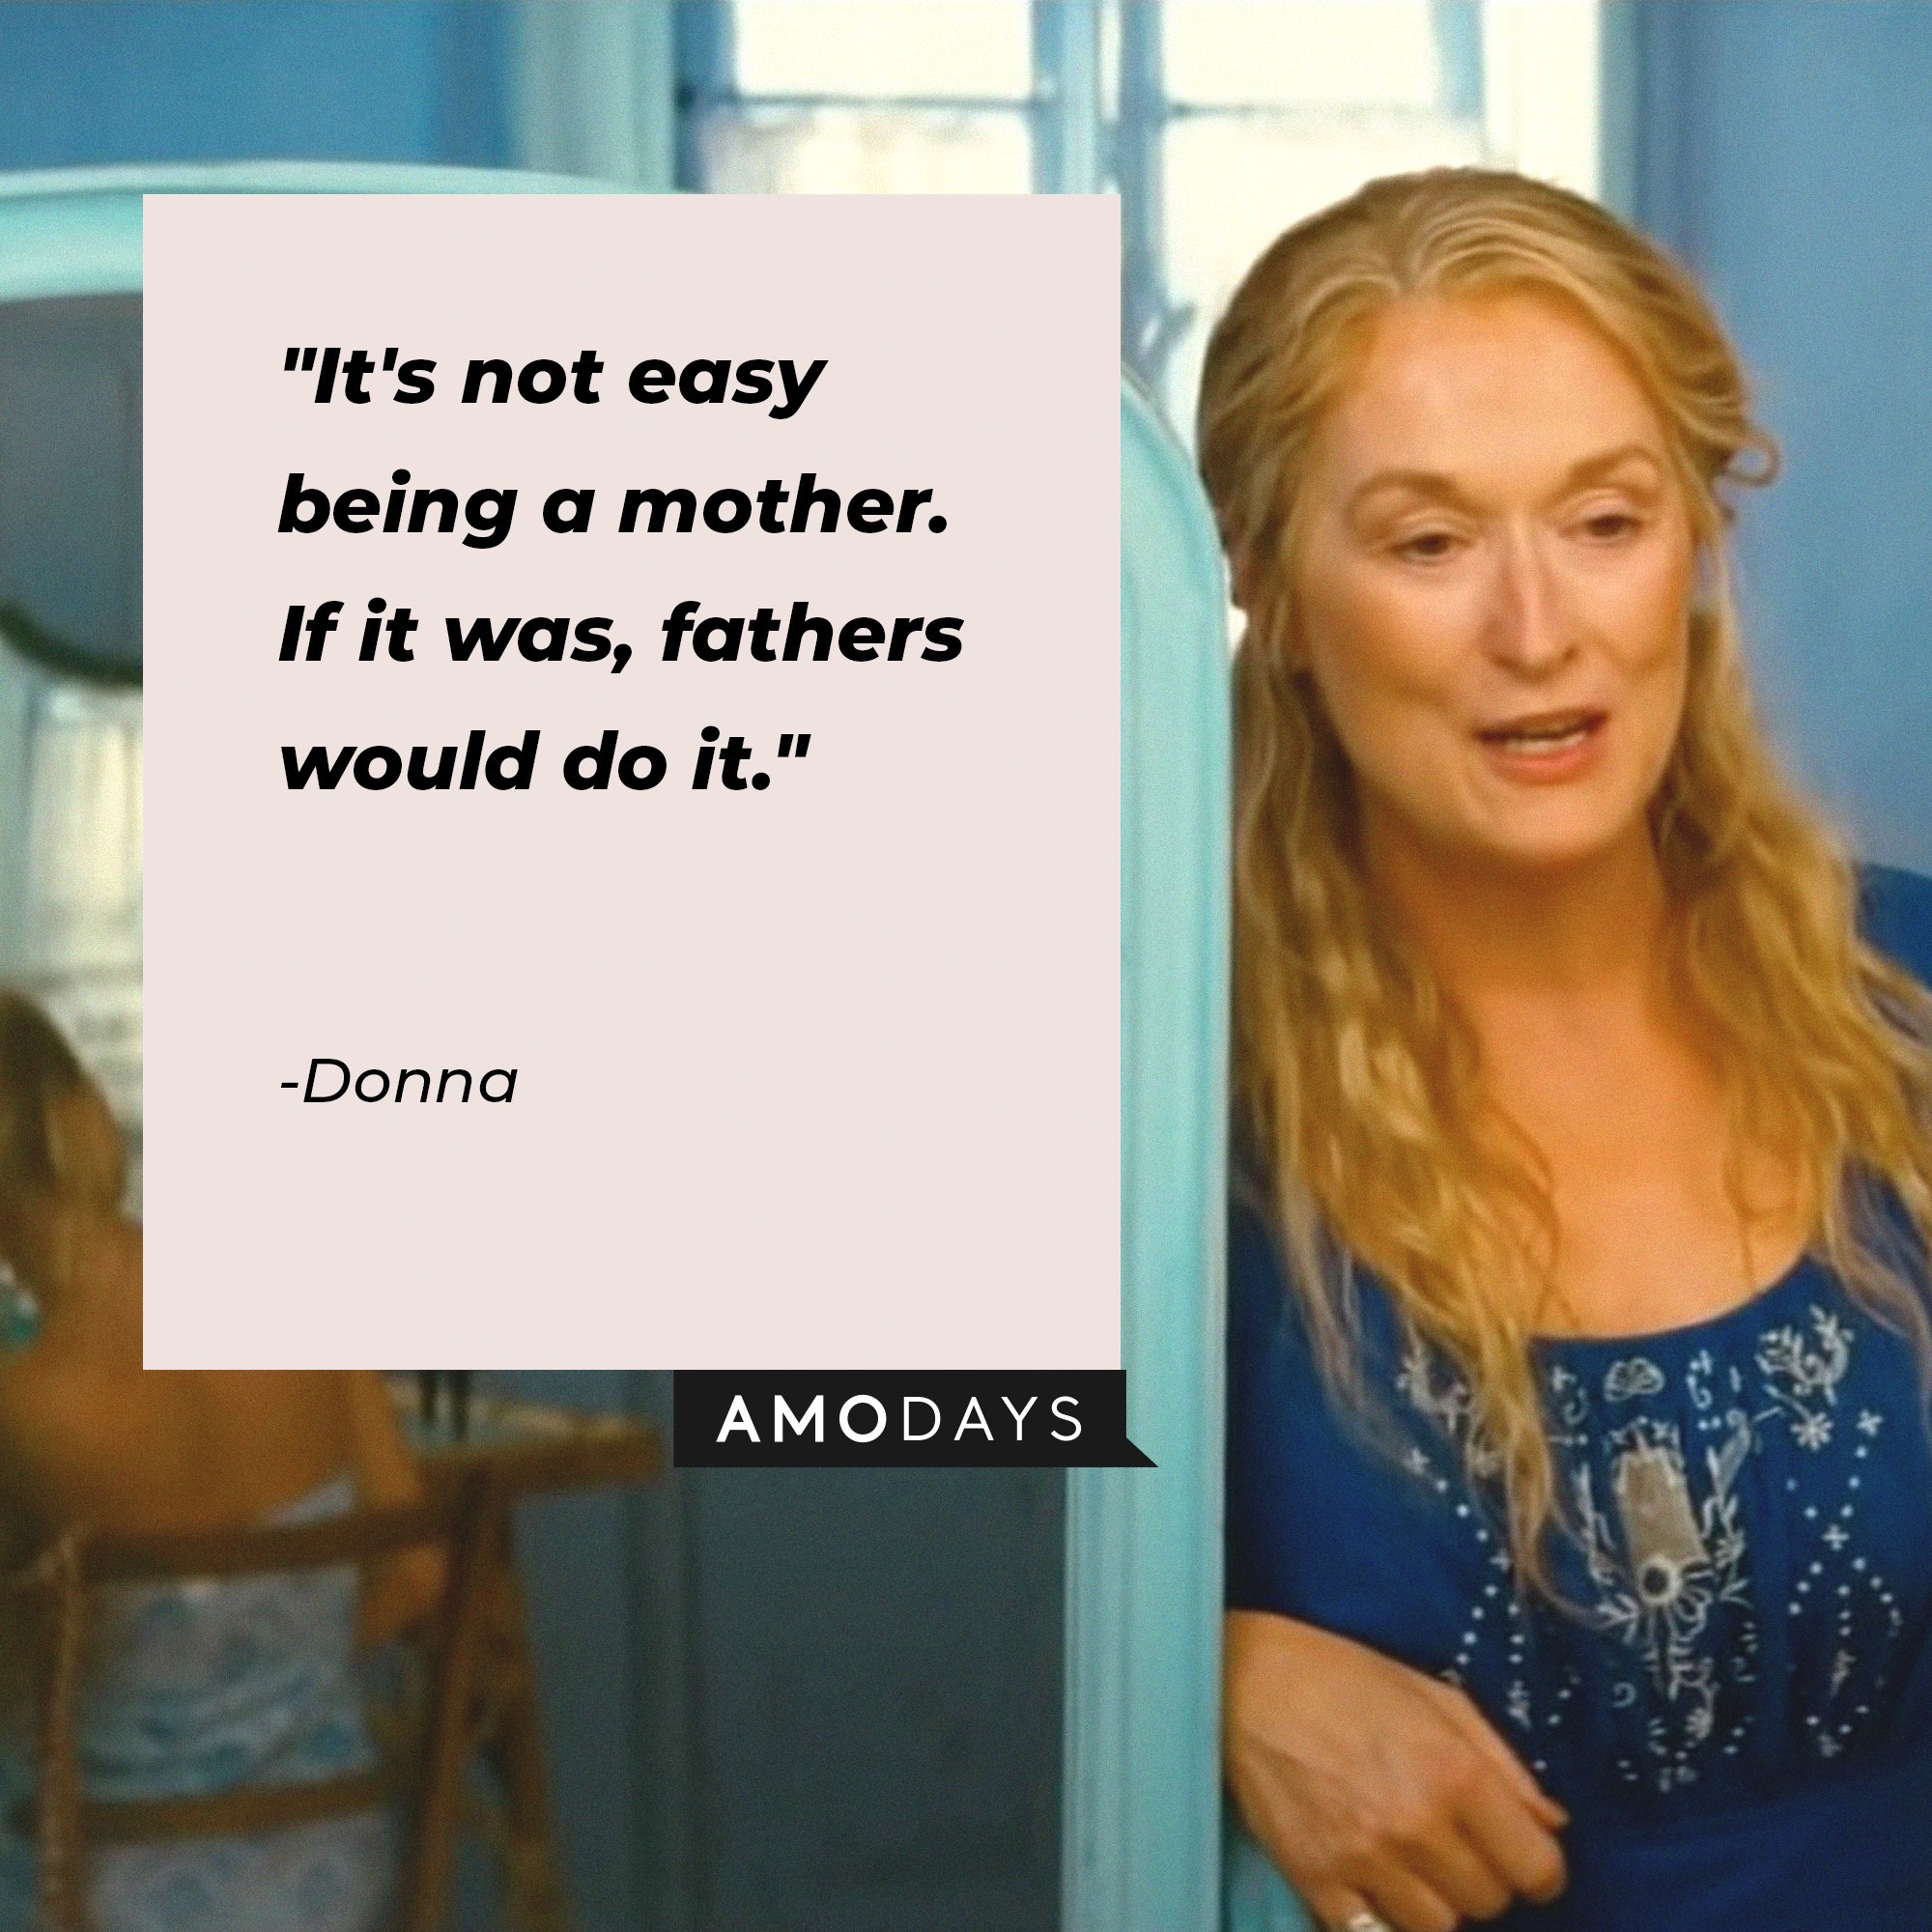 Donna's quote: "It's not easy being a mother. If it was, fathers would do it." | Image: AmoDays